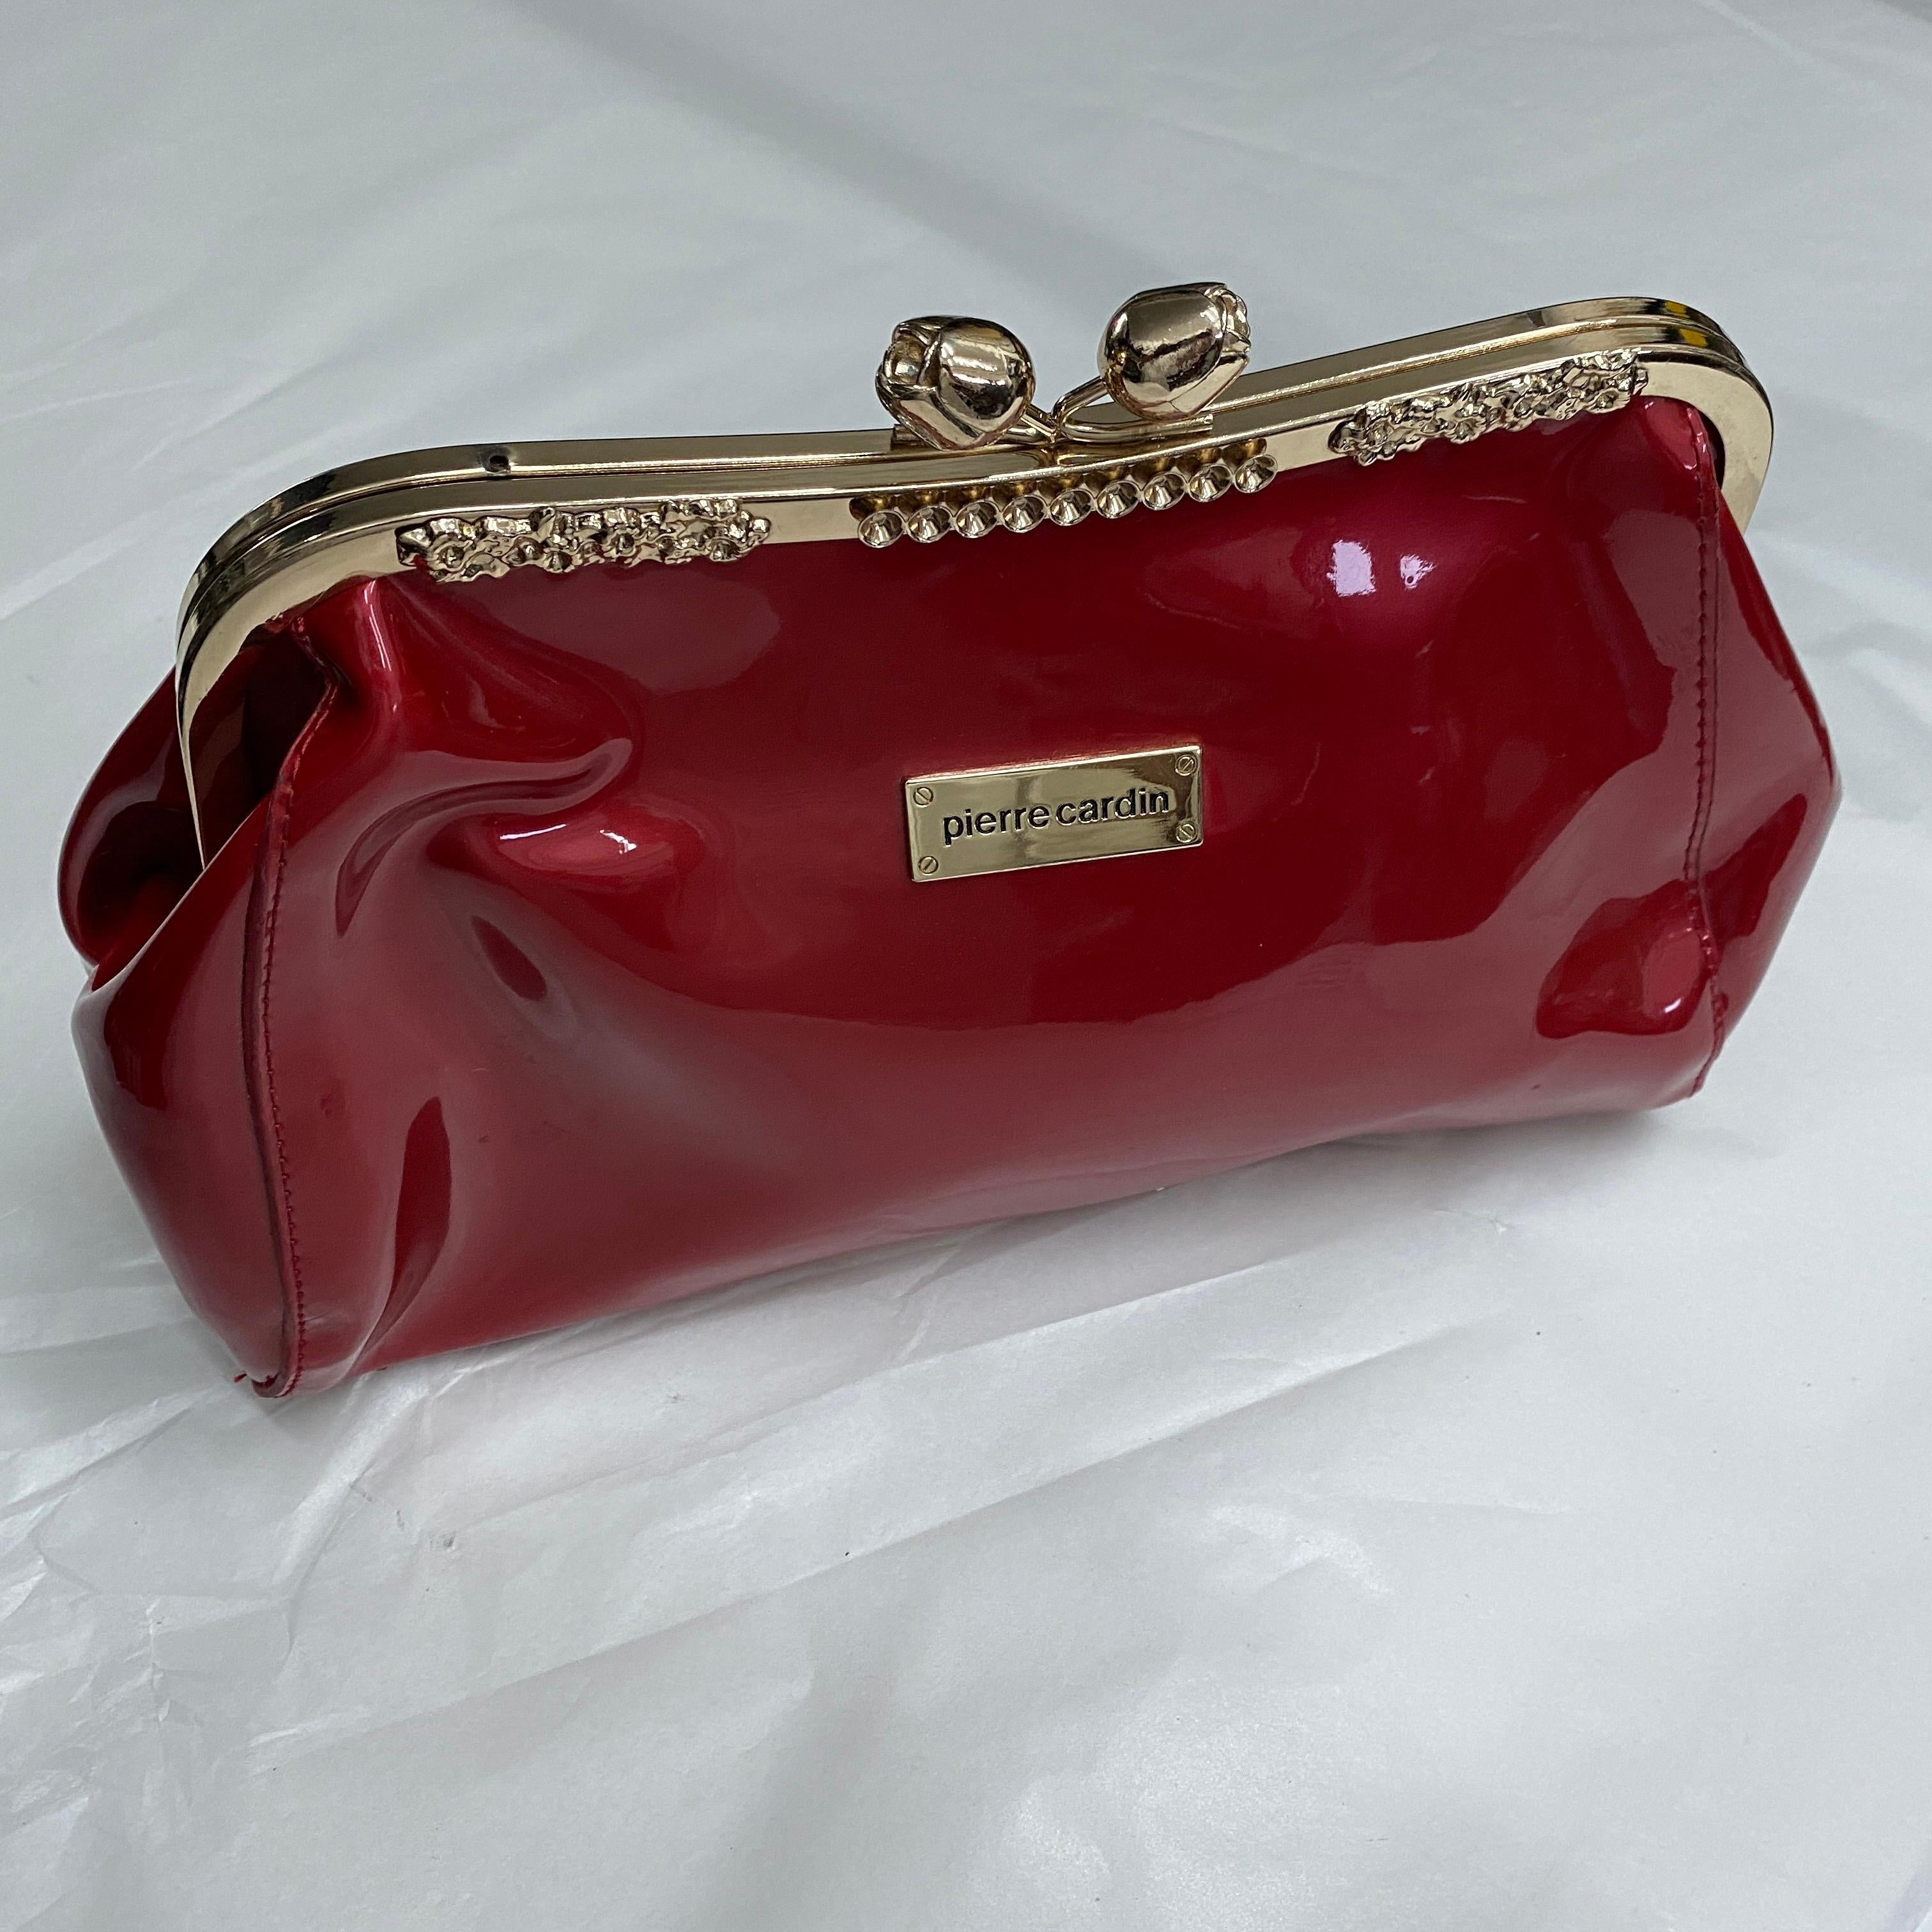 A very good conditions handbag by Pierre Cardin, it has been made in the Eighties. The pink plastic it's an iconic color and material of the period.